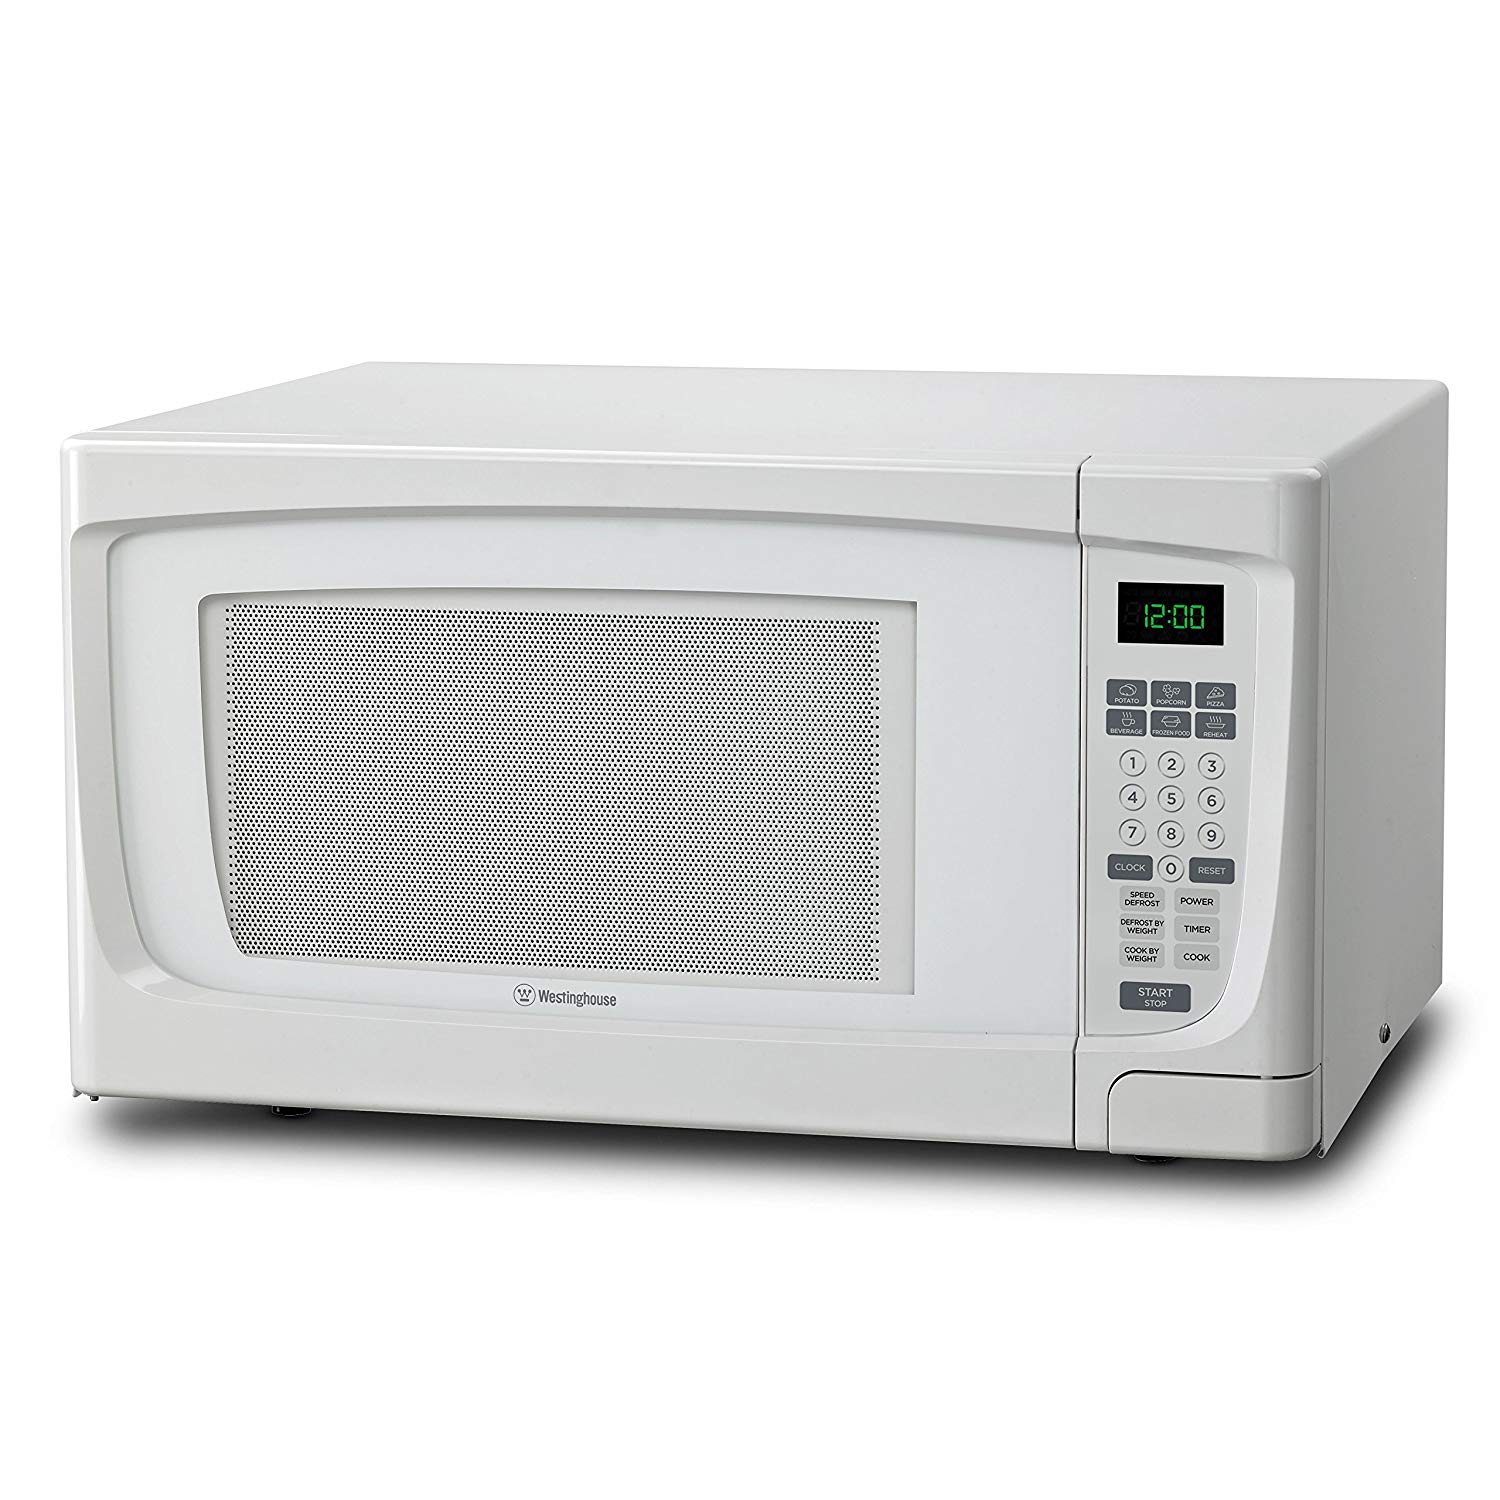 Westinghouse WCM16100W 1000 Watt Counter Top Microwave Oven, 1.6 Cubic Feet, White Cabinet